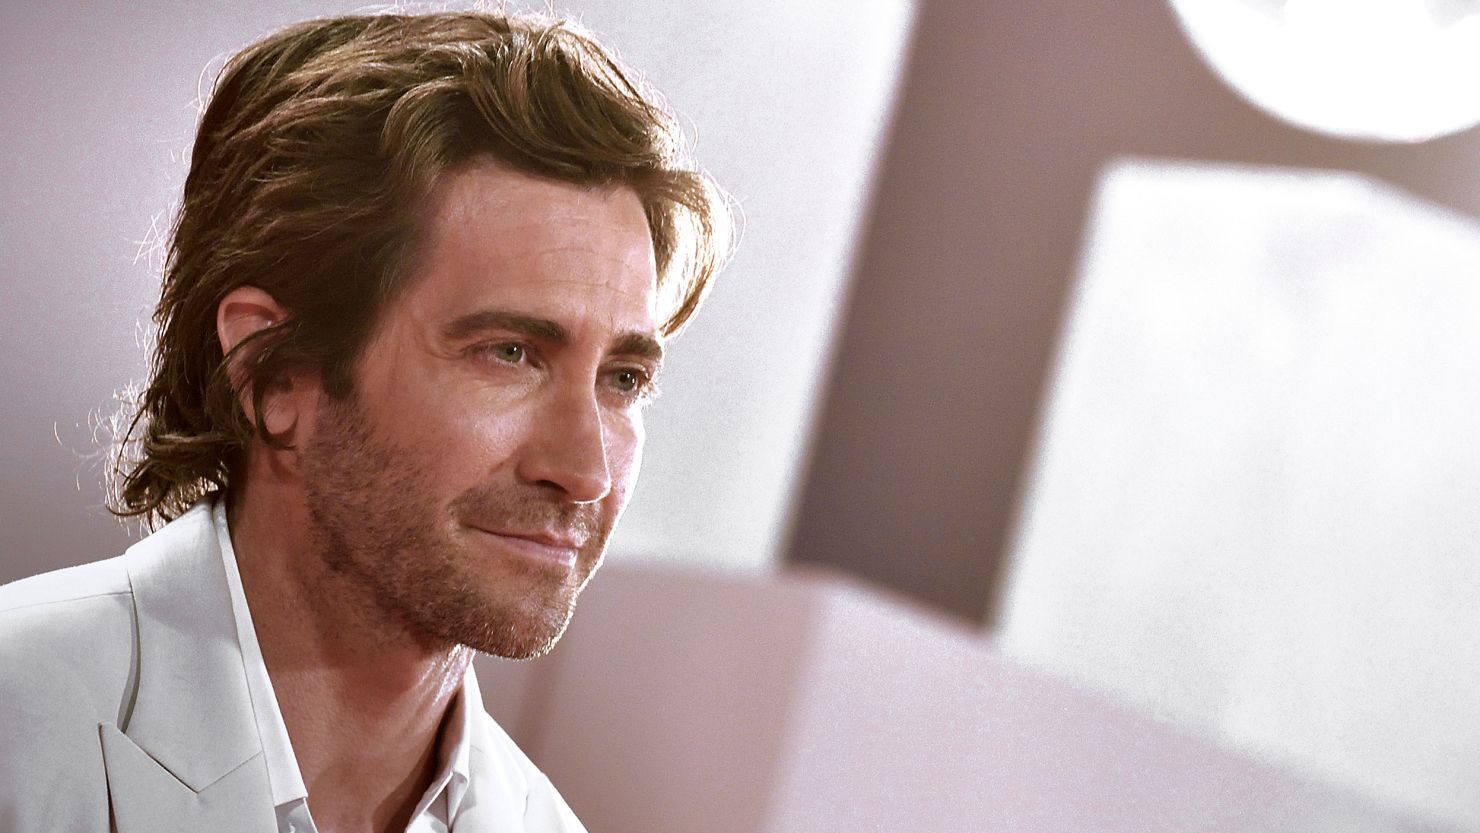 Jake Gyllenhaal, here at the Venice Film Festival in September, is reflecting on his career and future personal goals.